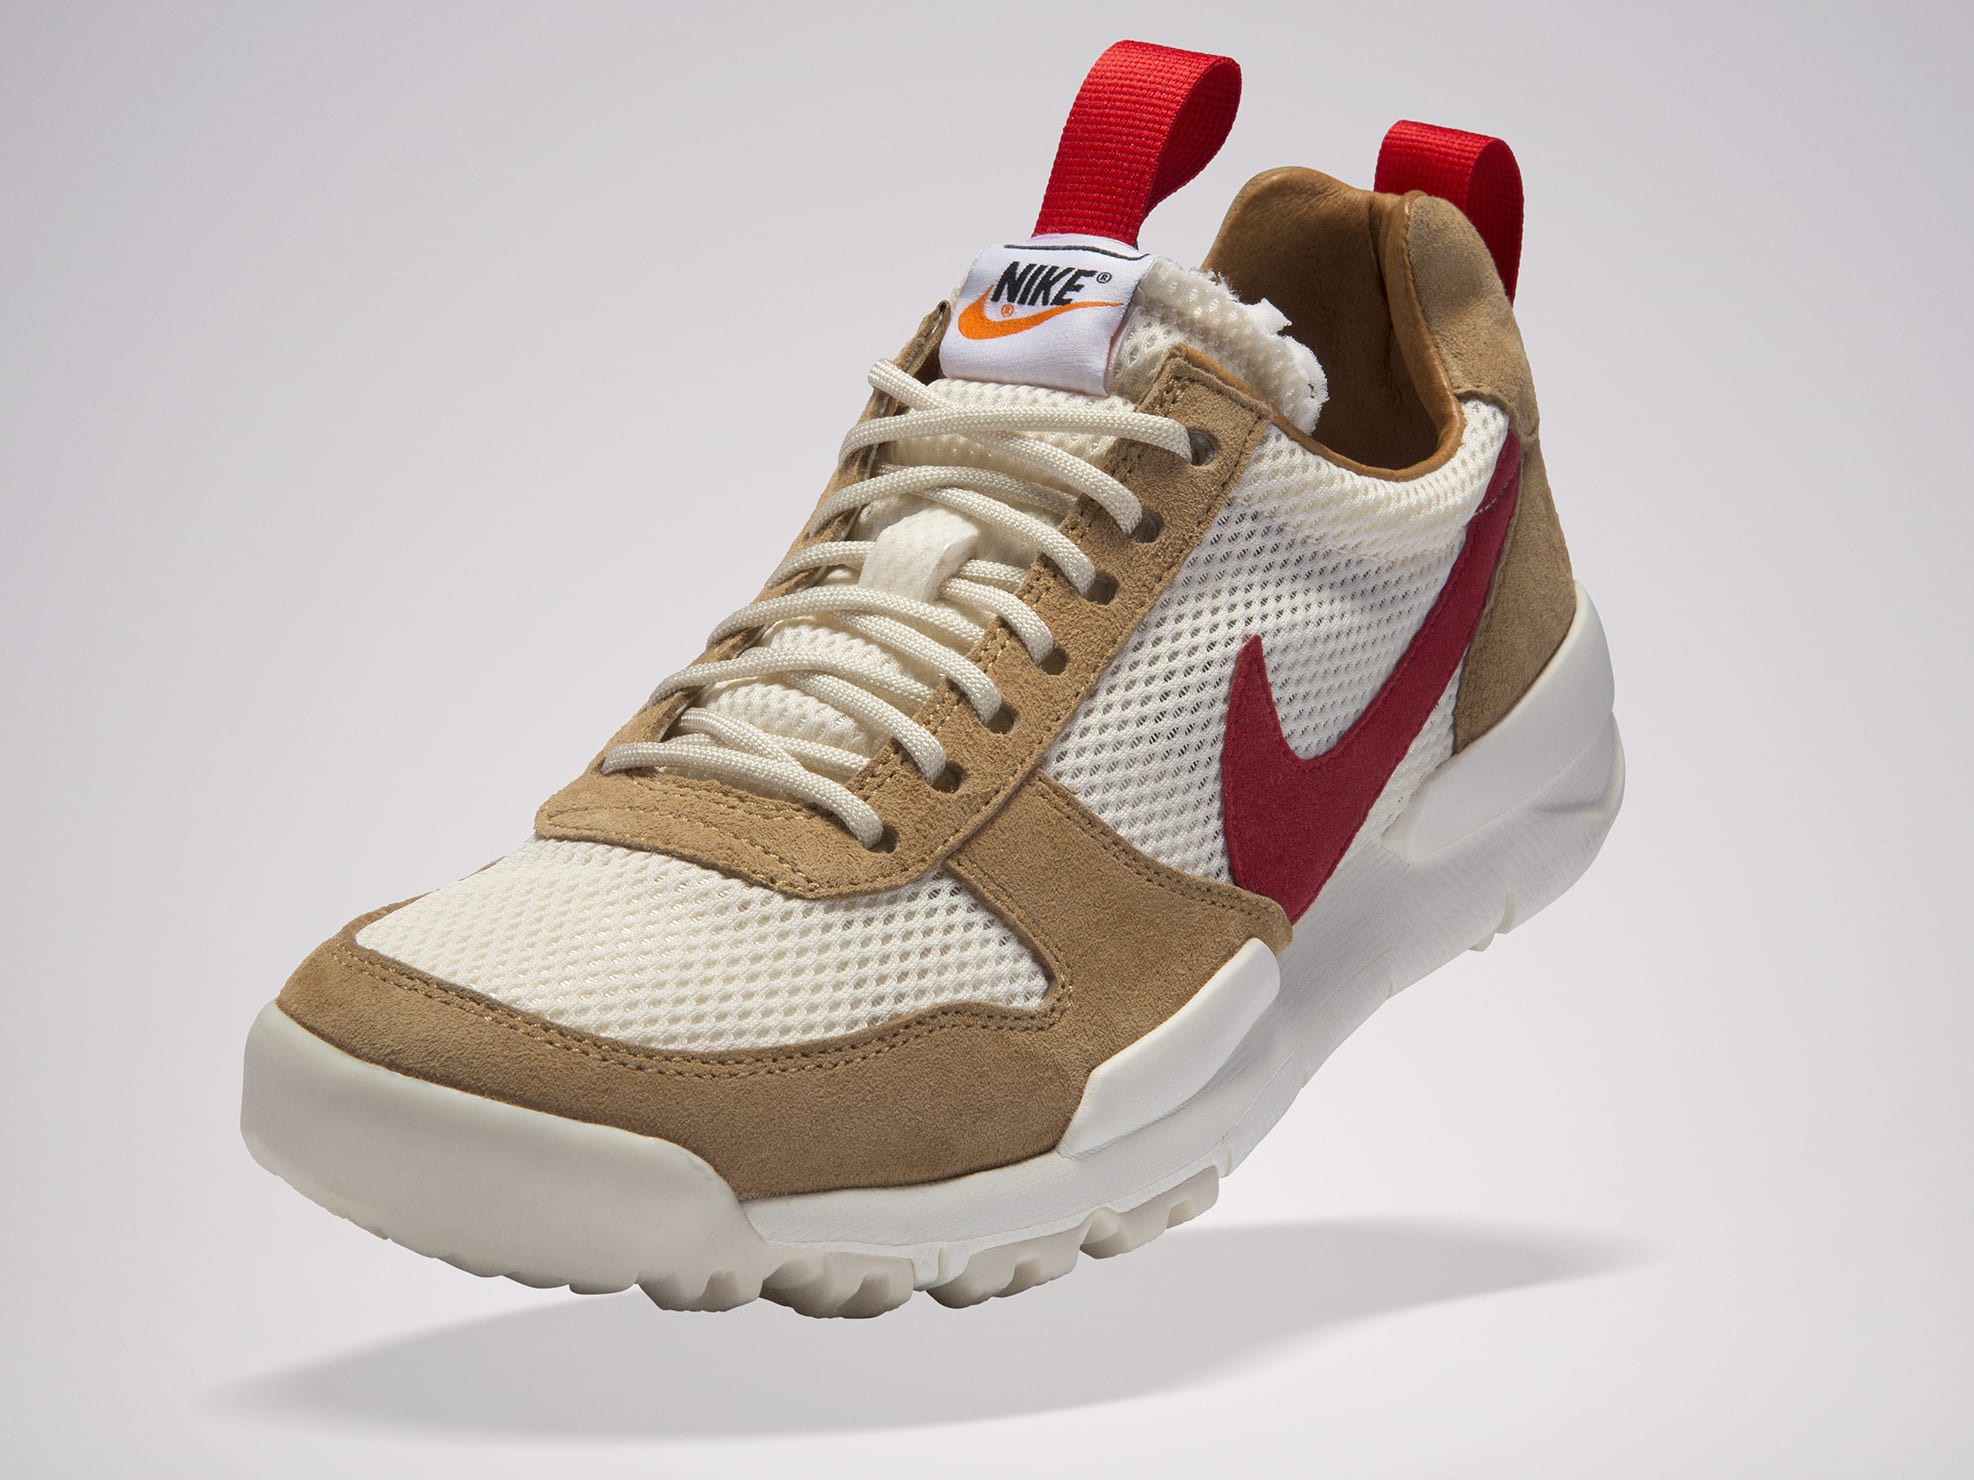 The Tom Sachs Nike Mars Yard 2.0 Drop Brings Out The Coolest Kids In NYC